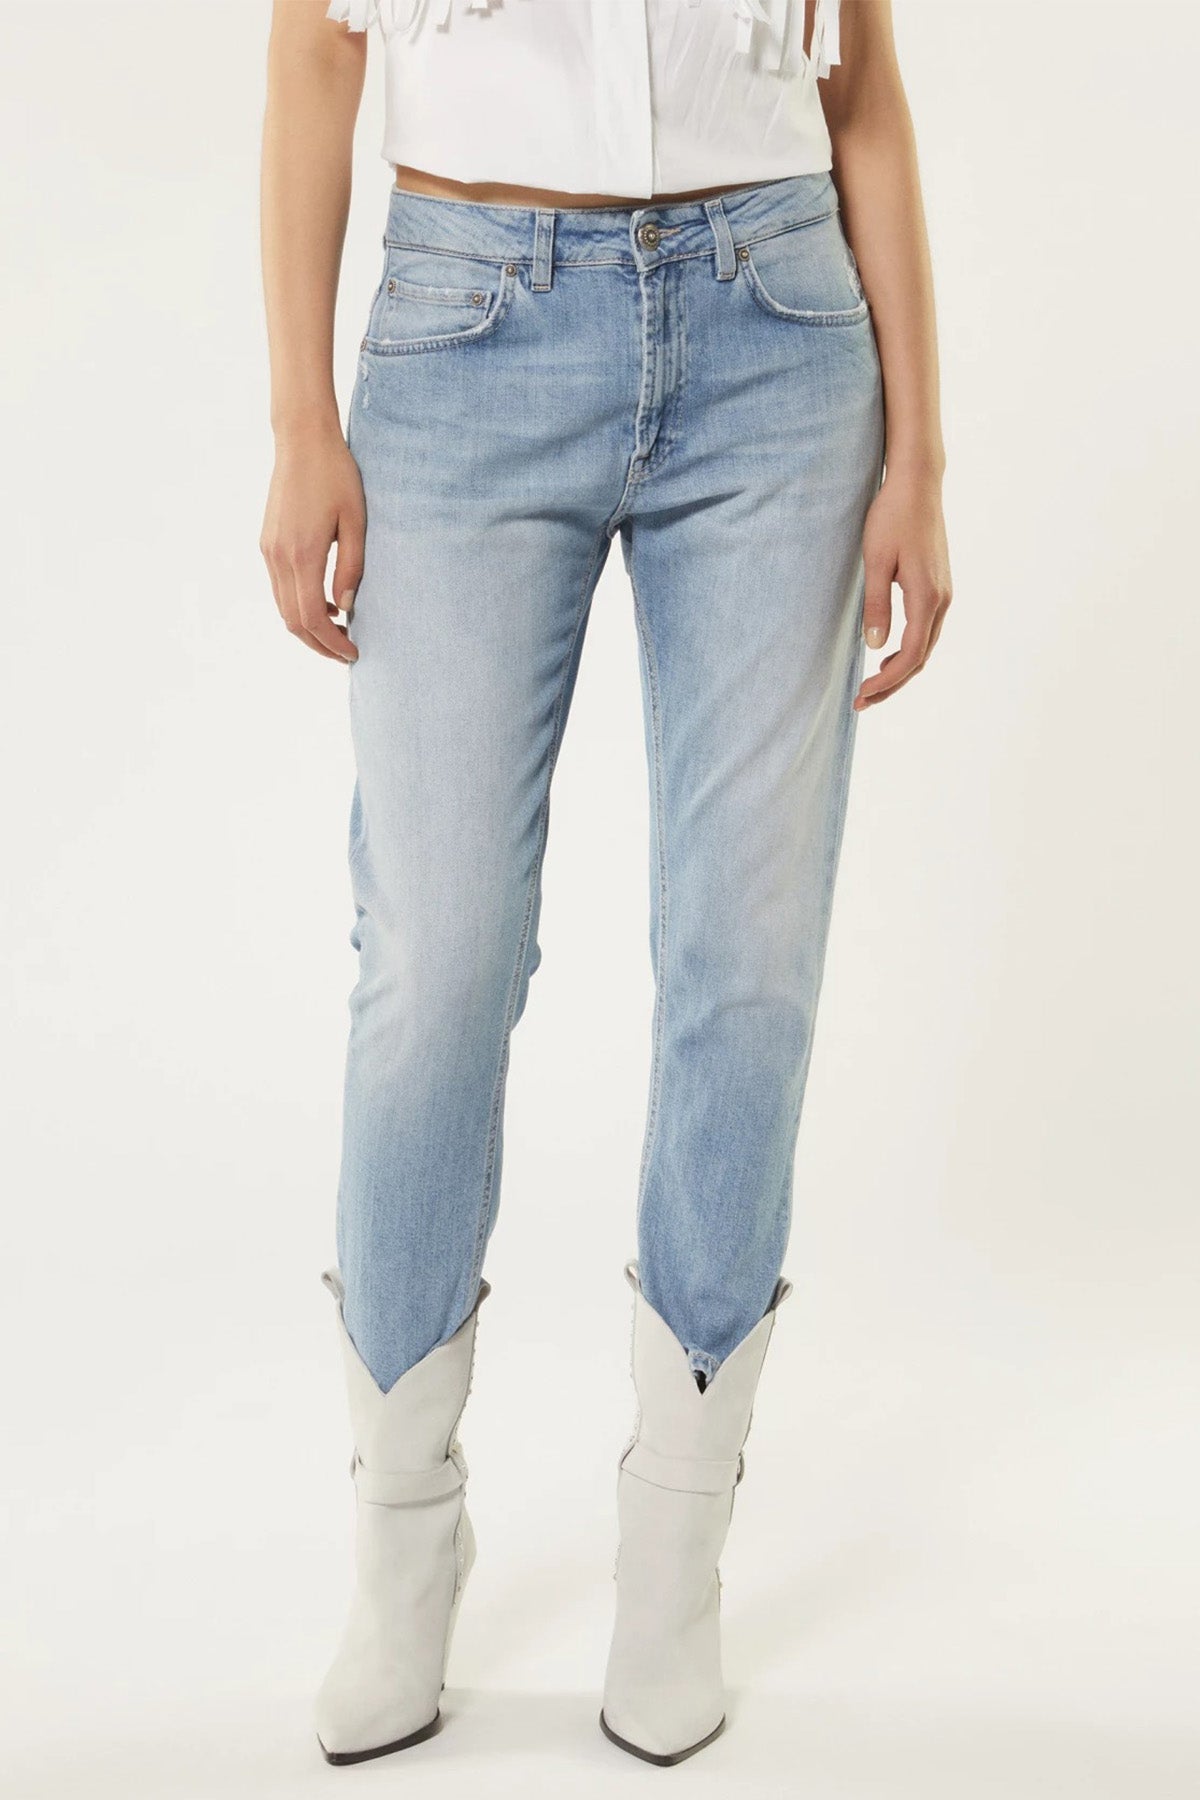 Dondup Mila Carrot Fit Jeans